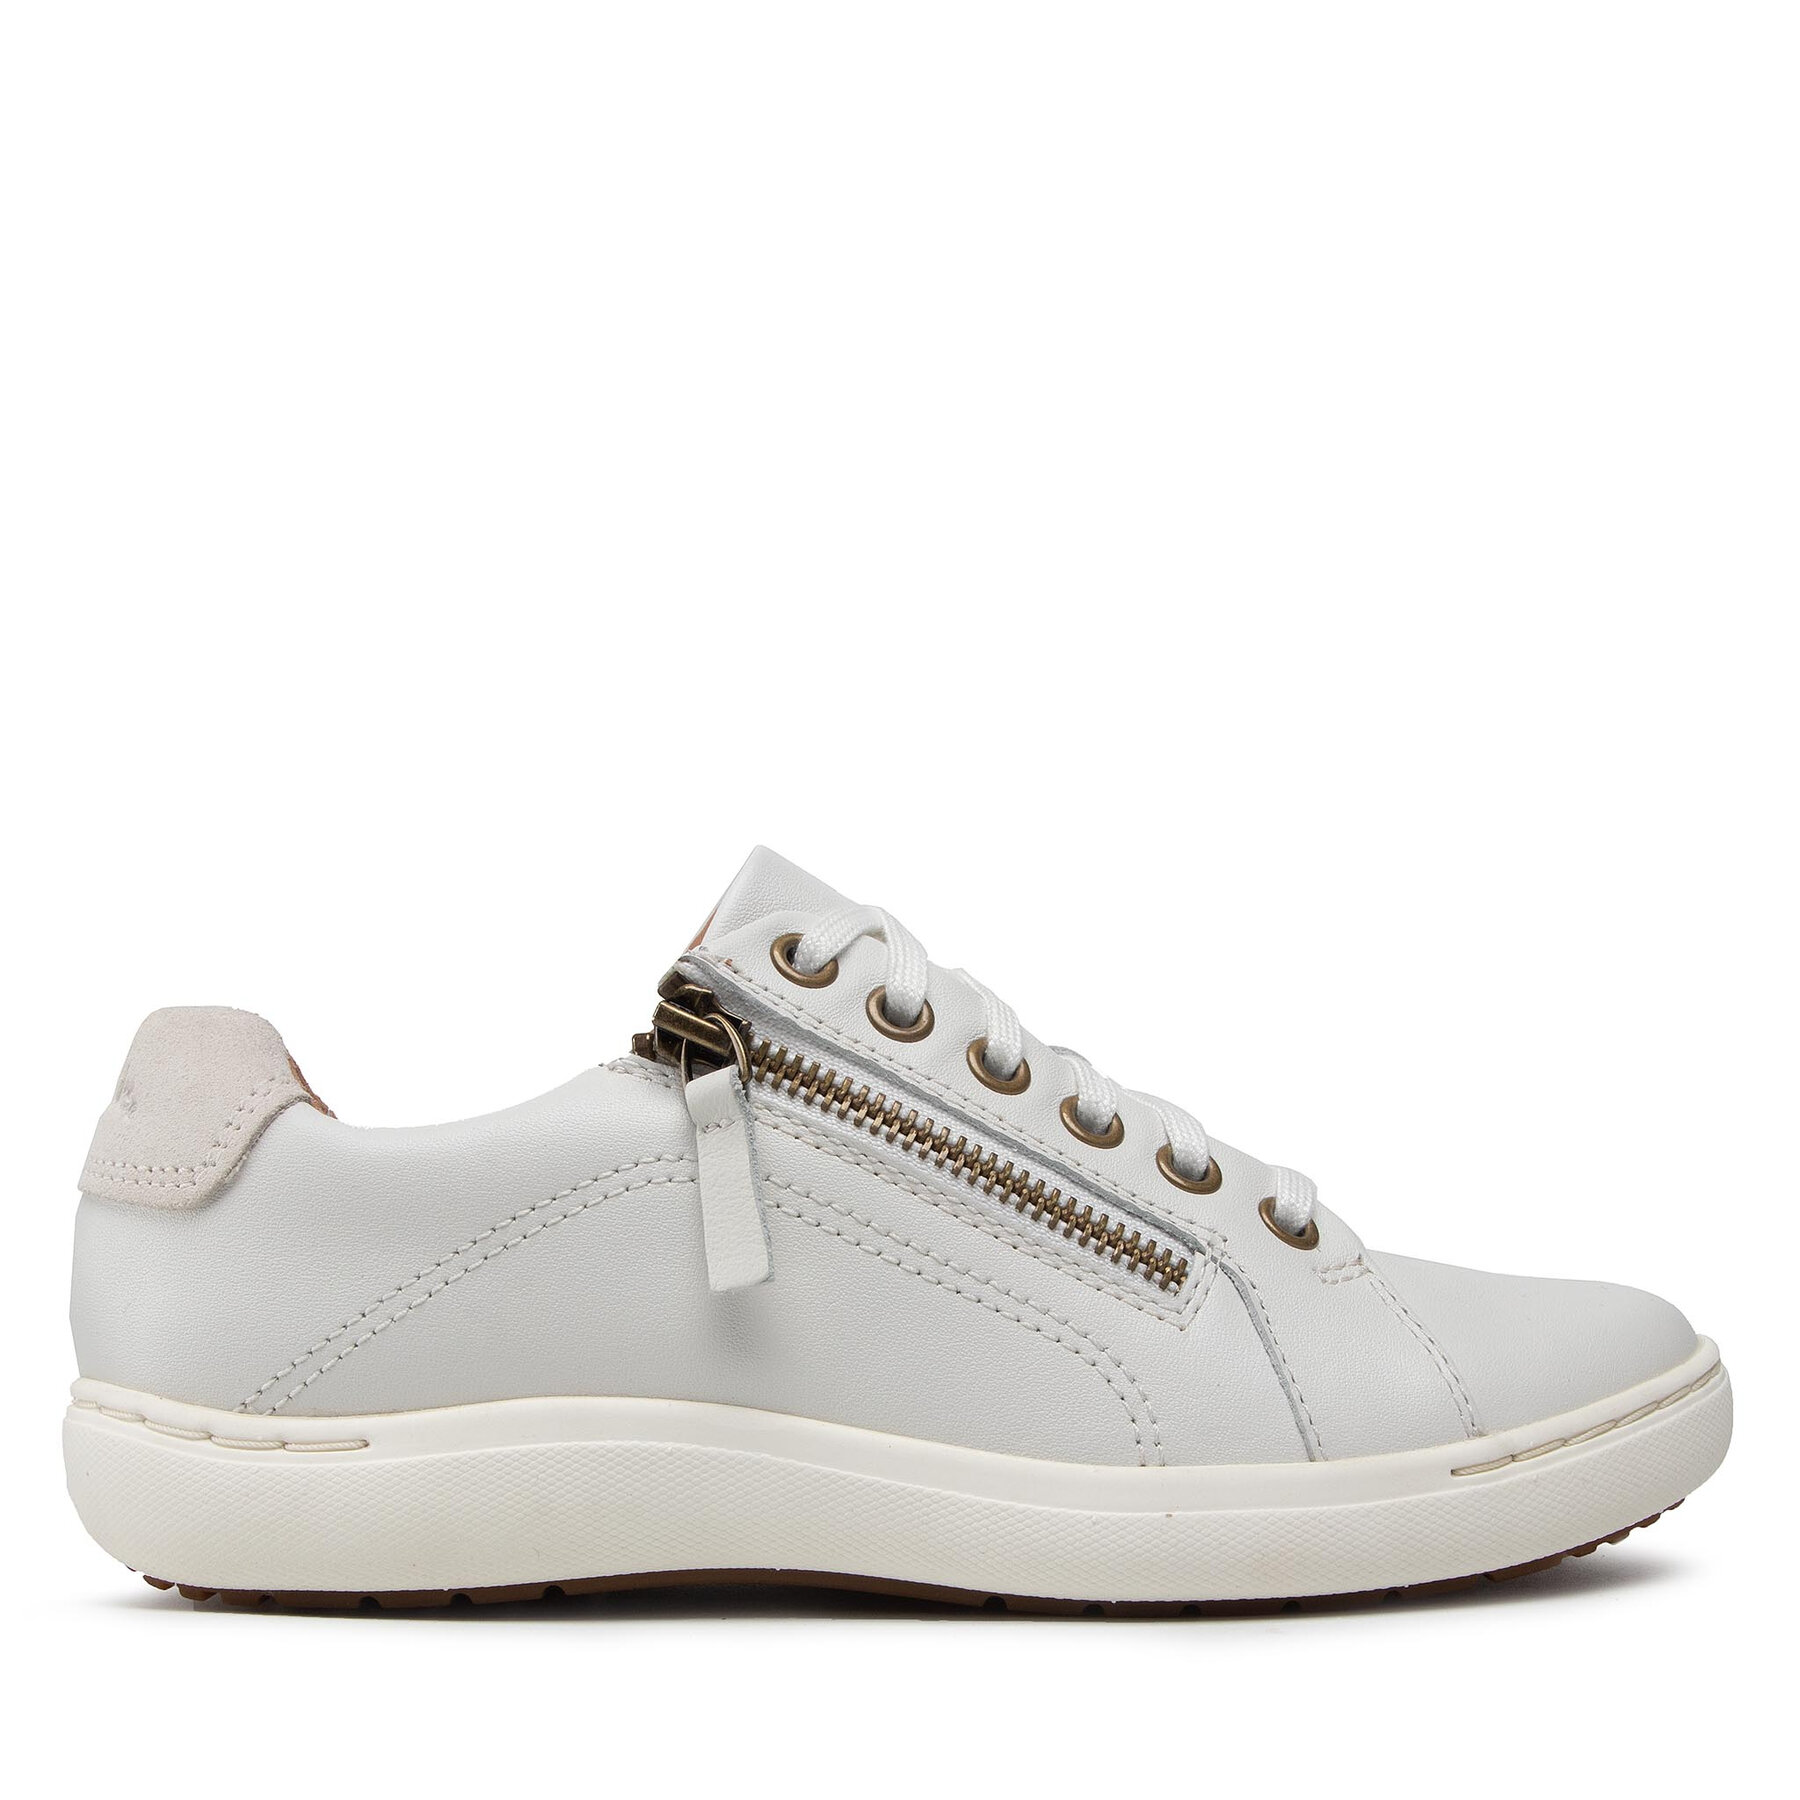 Sneakers Clarks Nalle Lace 261650014 White Leather von Clarks